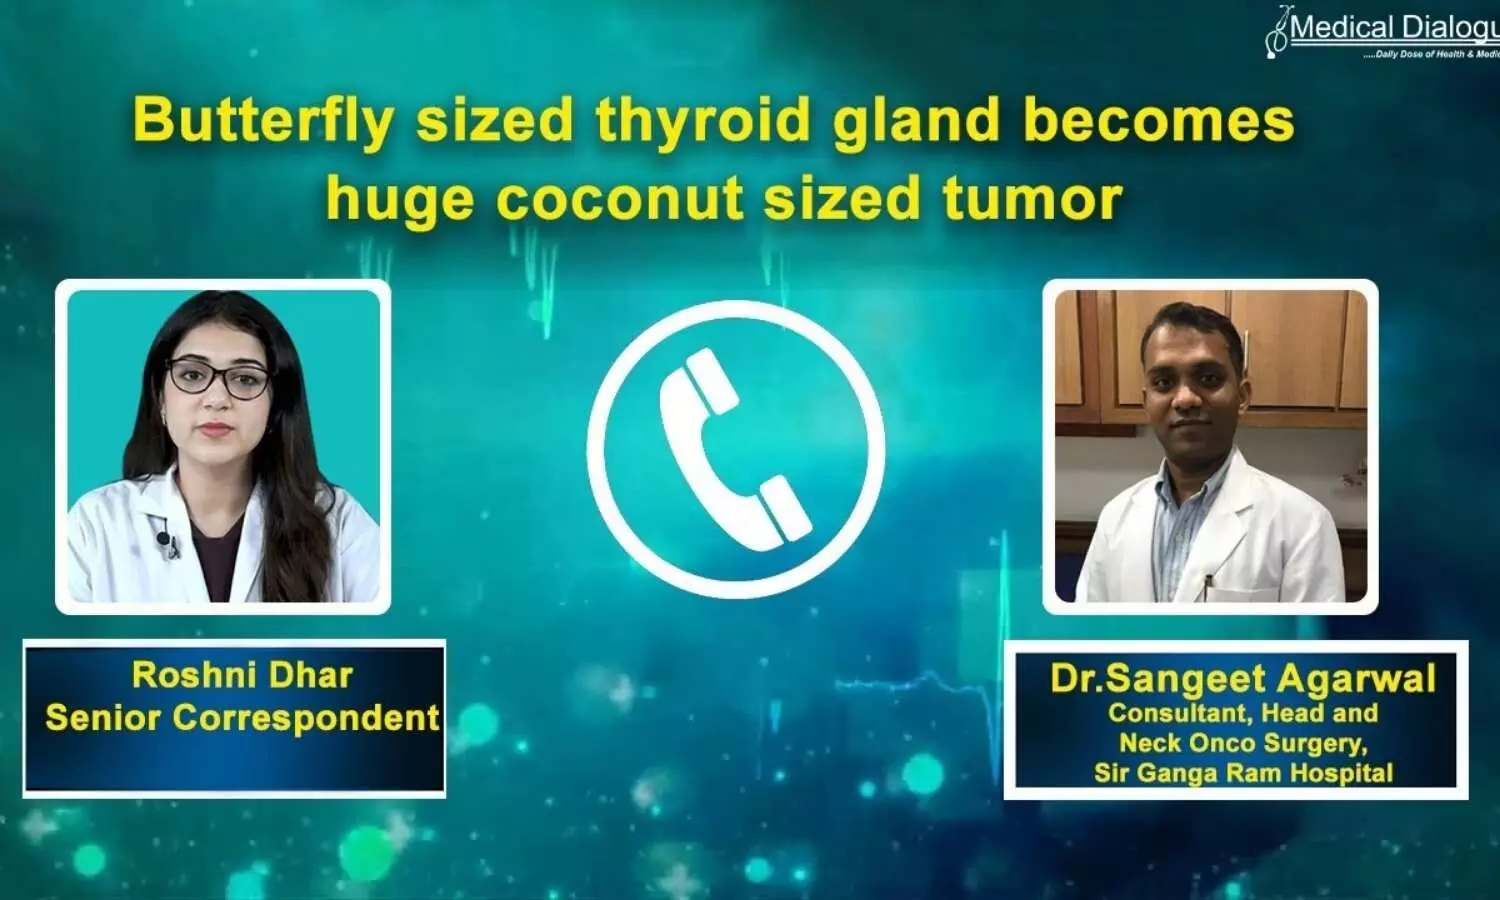 Doctors remove Coconut-size tumour from 72-year-old mans thyroid gland at Sir Ganga Ram Hospital